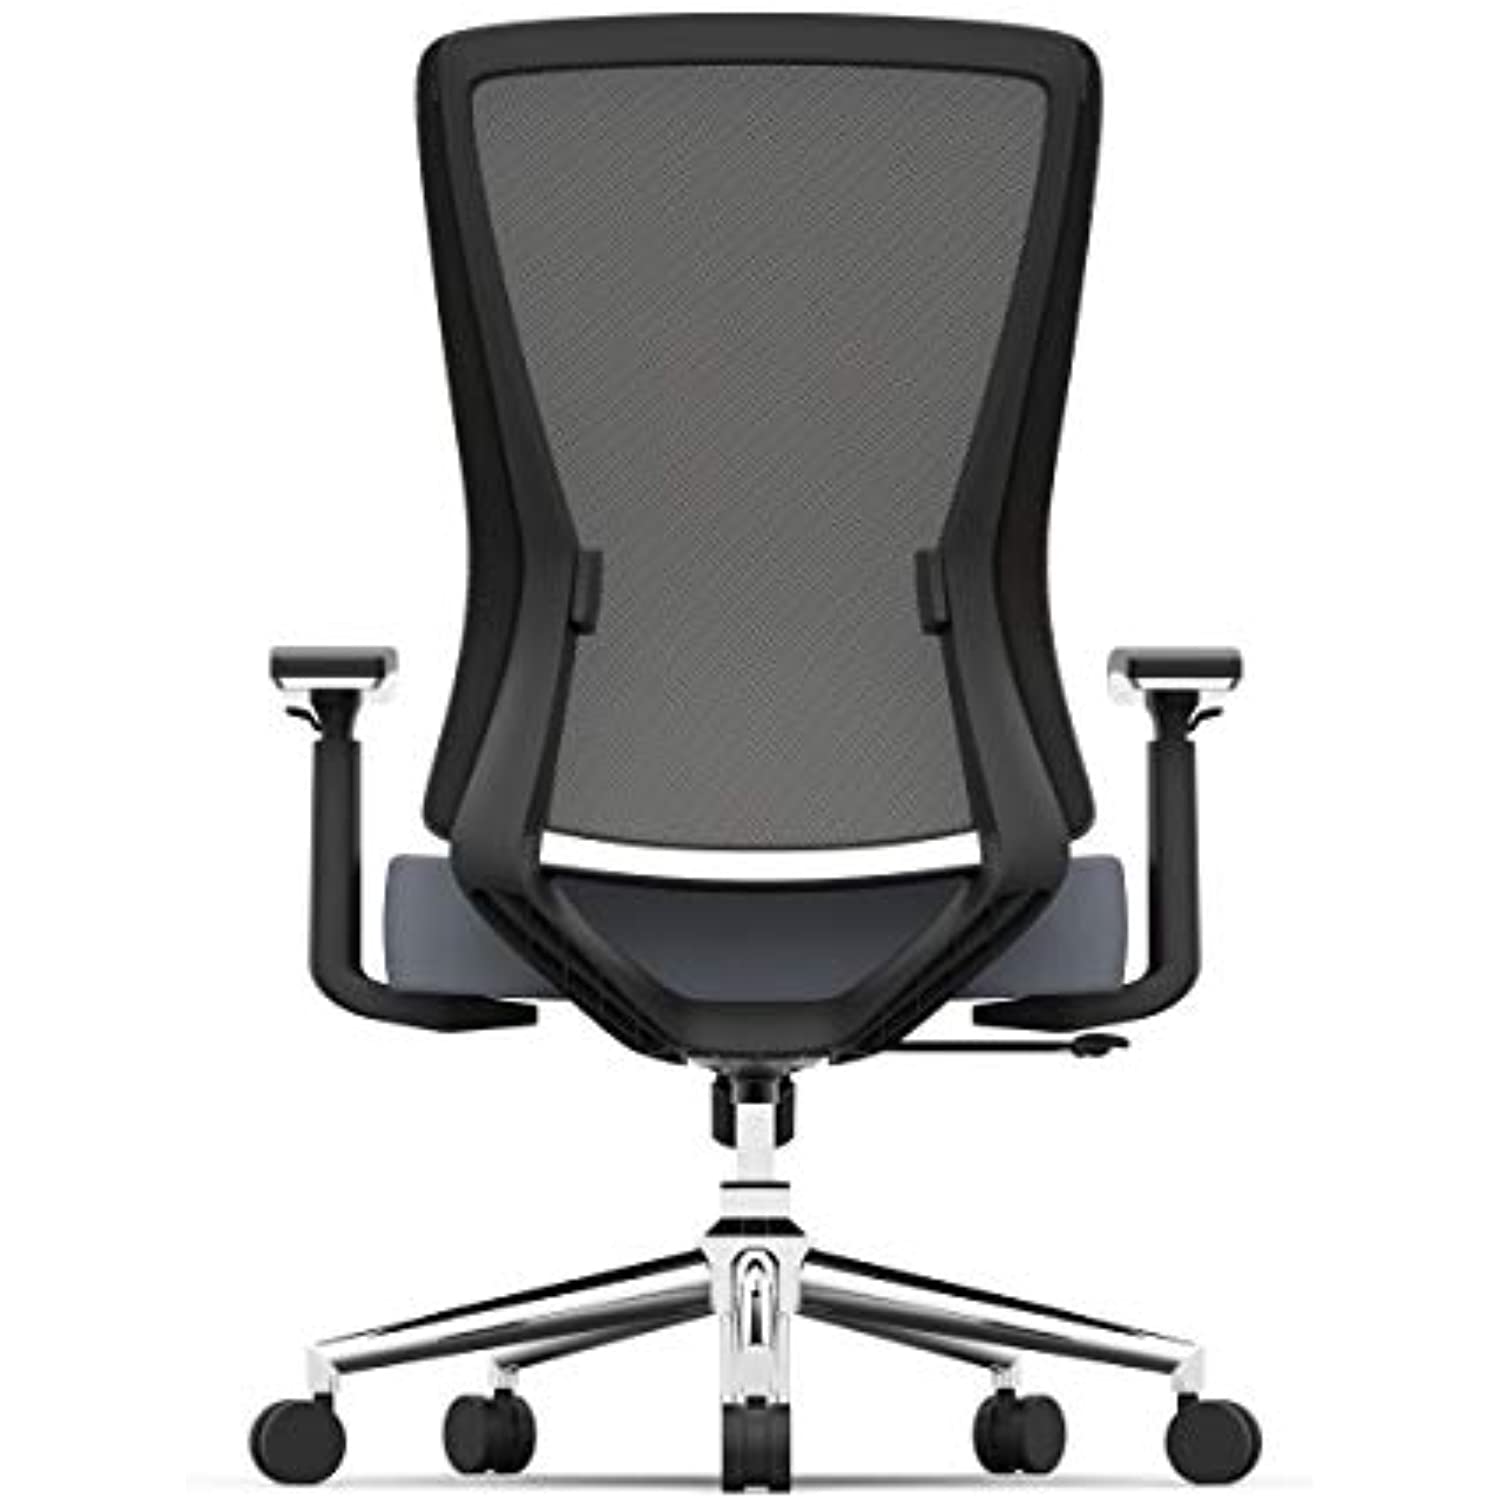 Realspace Levari Faux Leather Mid-Back Task Chair, Gray/Black - image 6 of 8